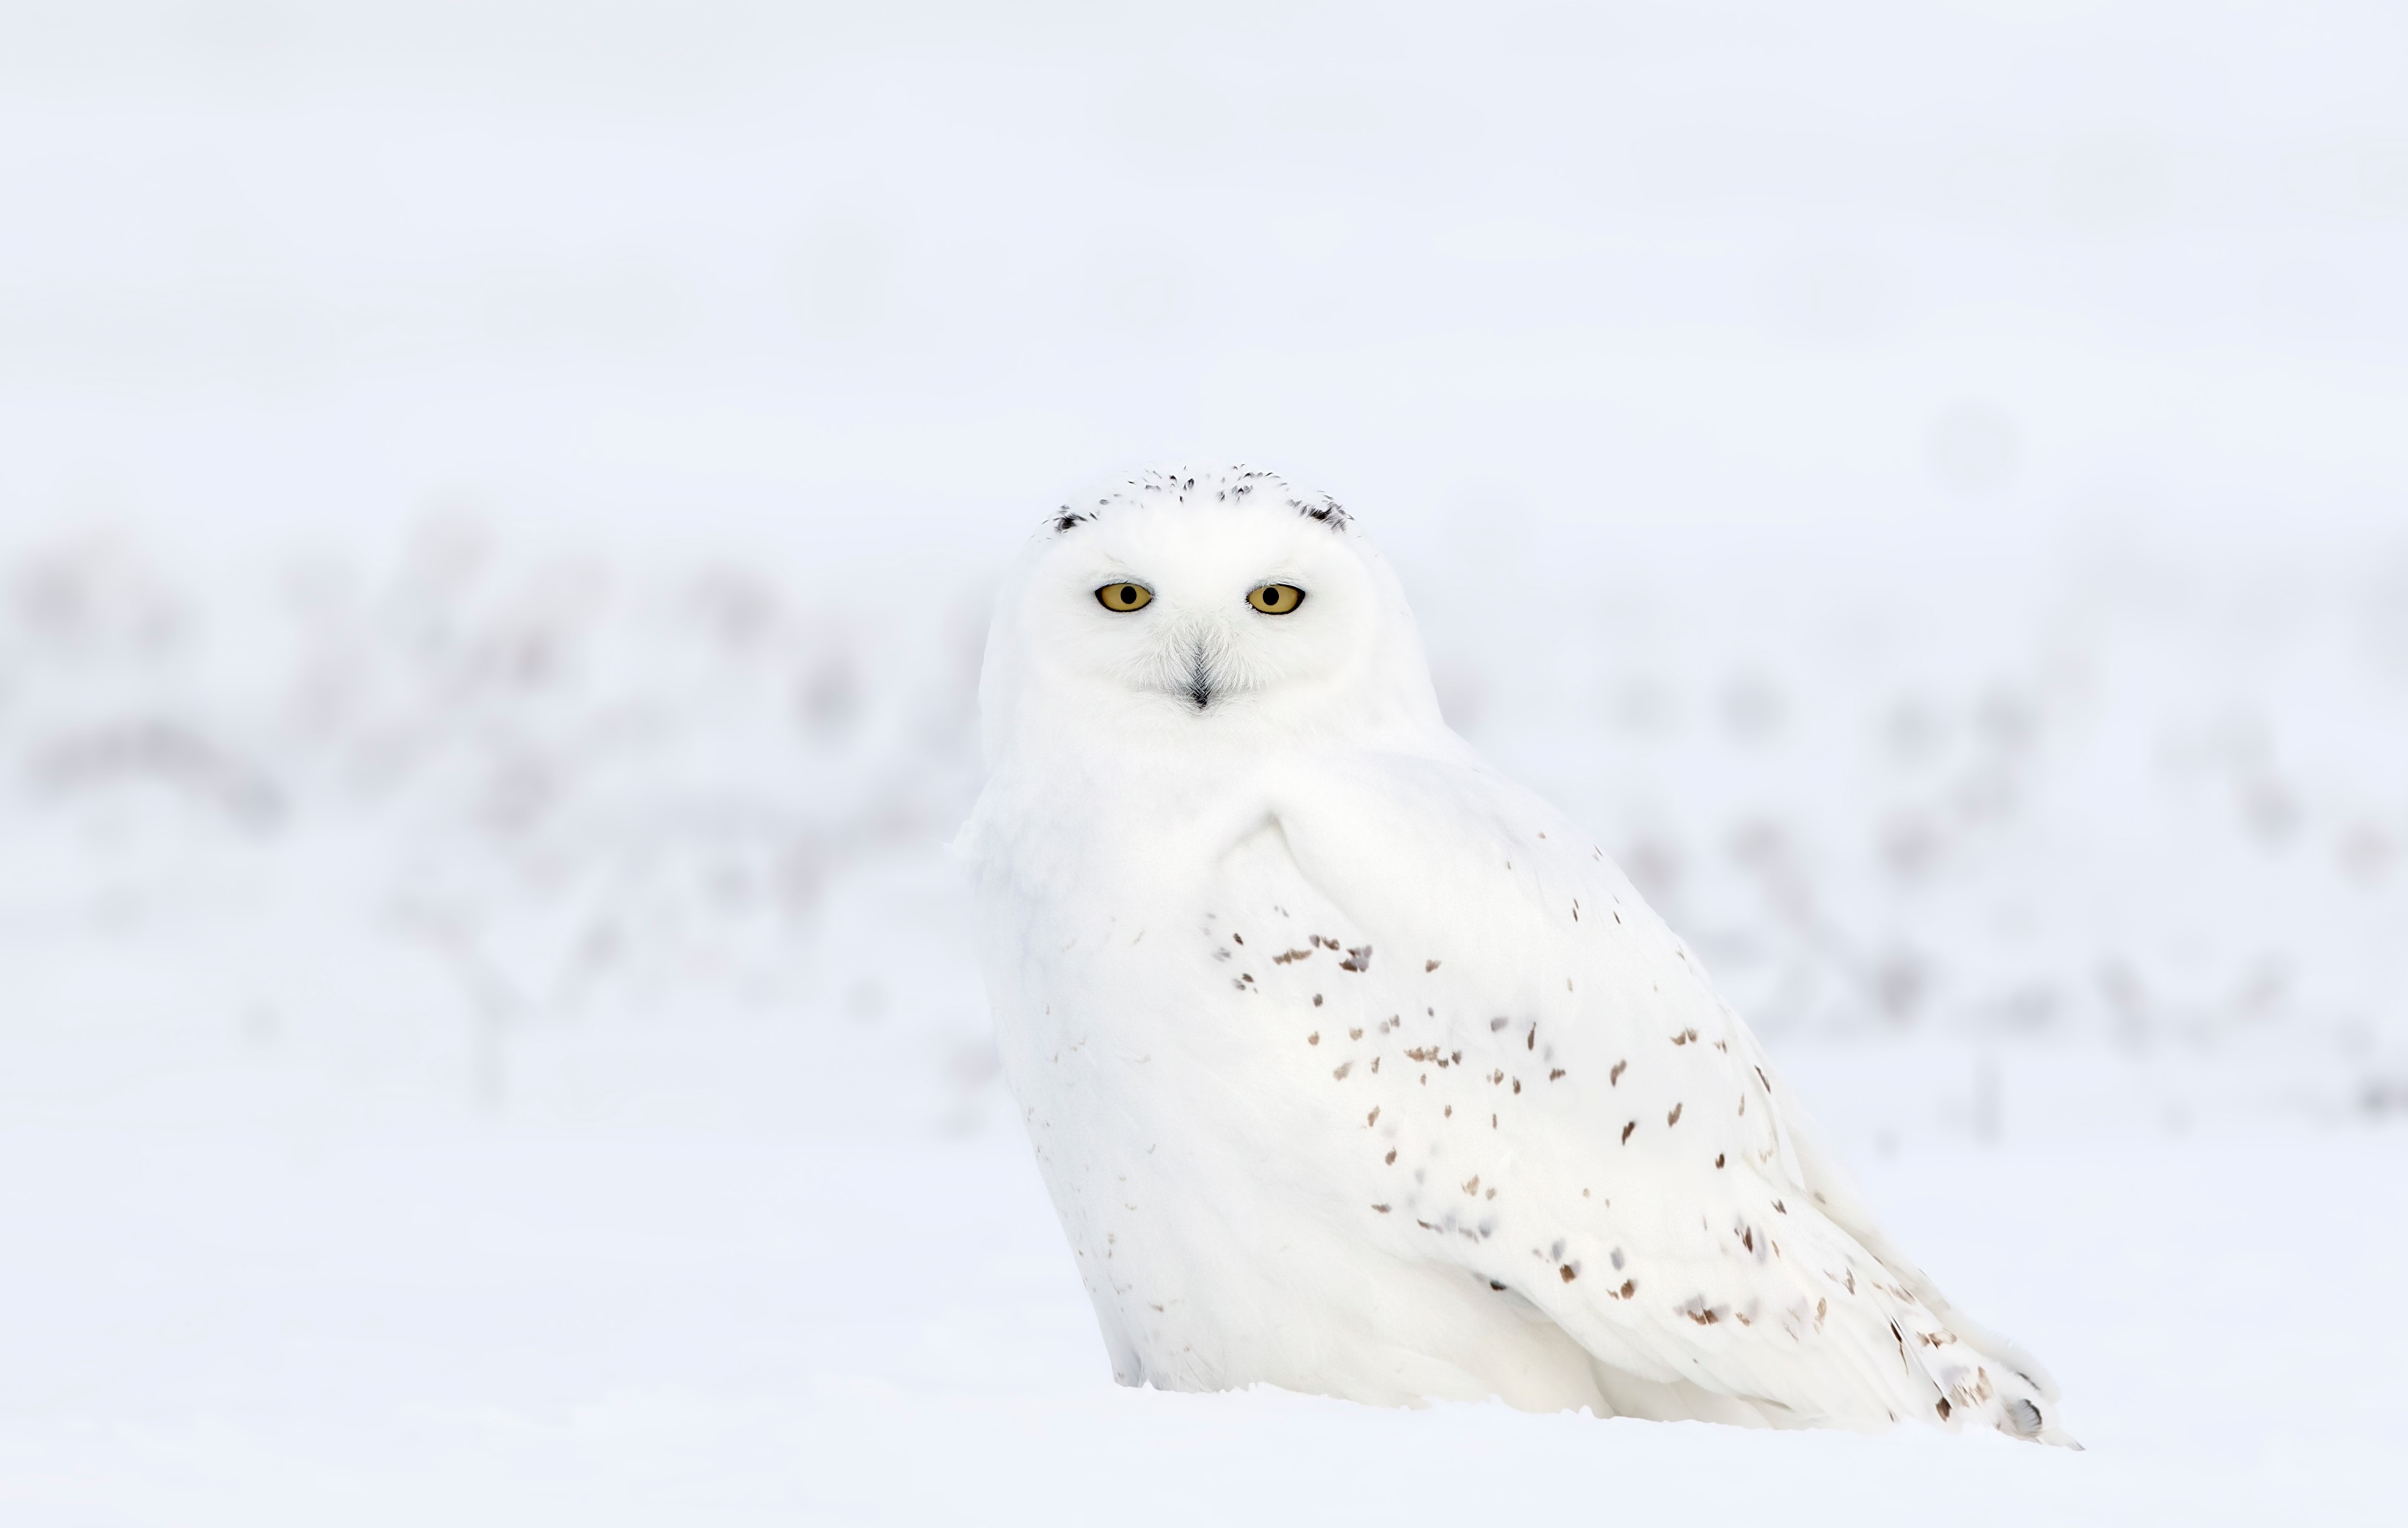 A snowy owl blending in with a snow-covered field.